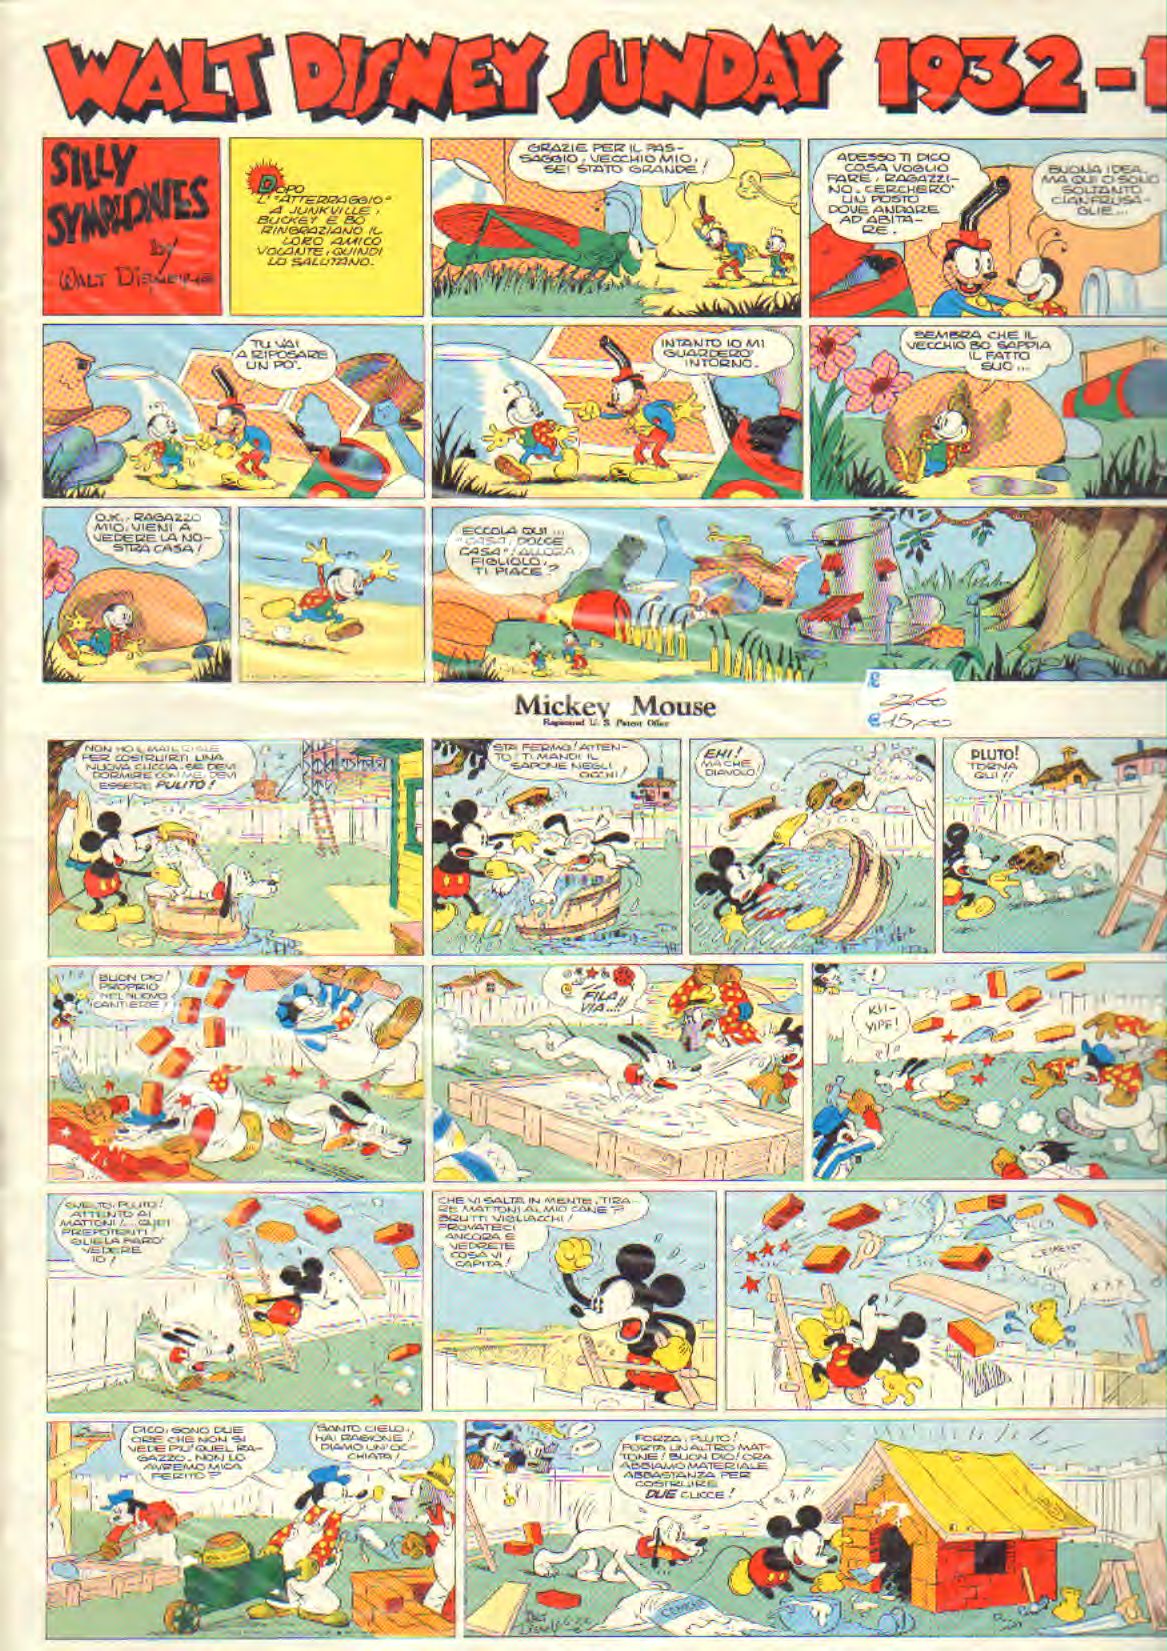 Silly Symphonies E Mickey Mouse (1932/1) 32 P